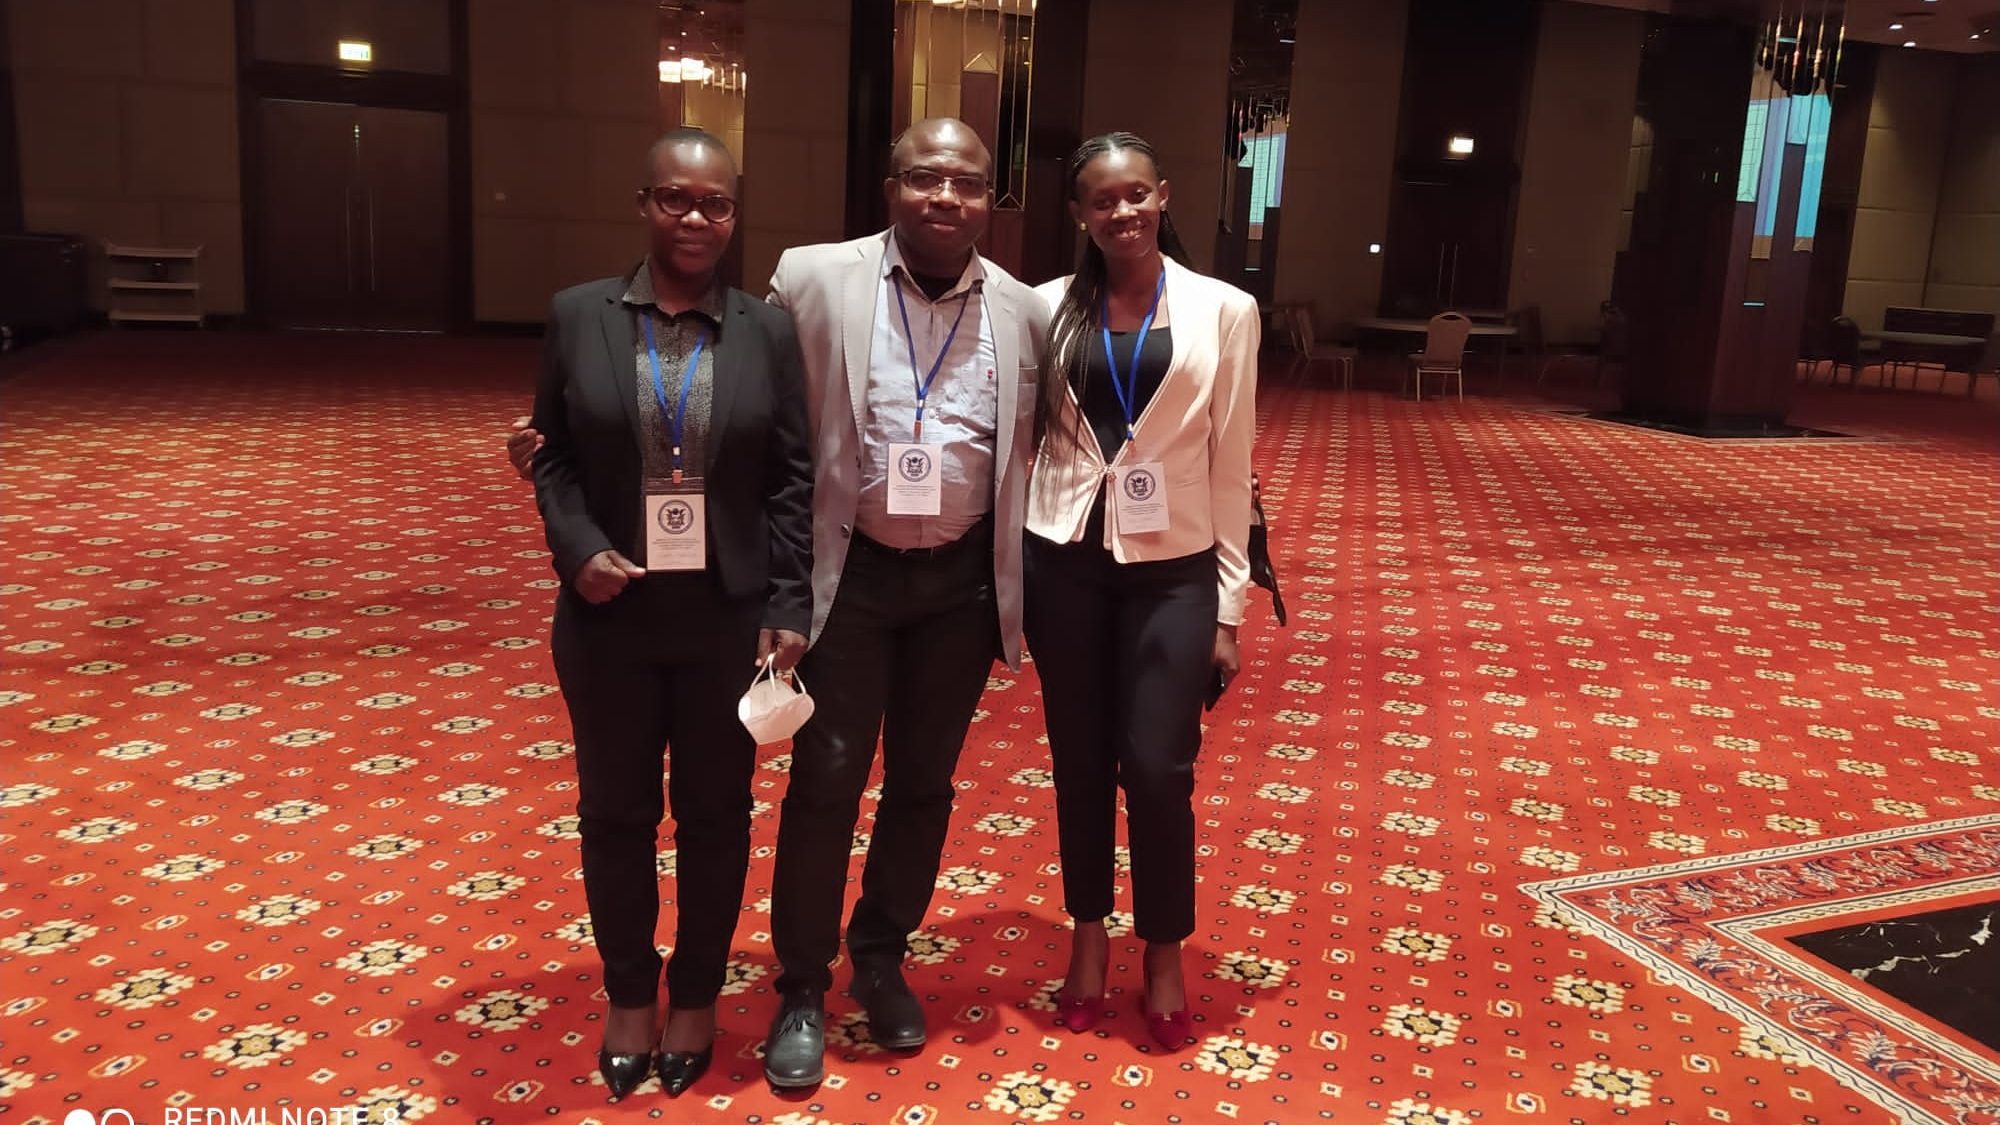 Sarah Nabachwa and others at the AGBA Conference in Turkey.